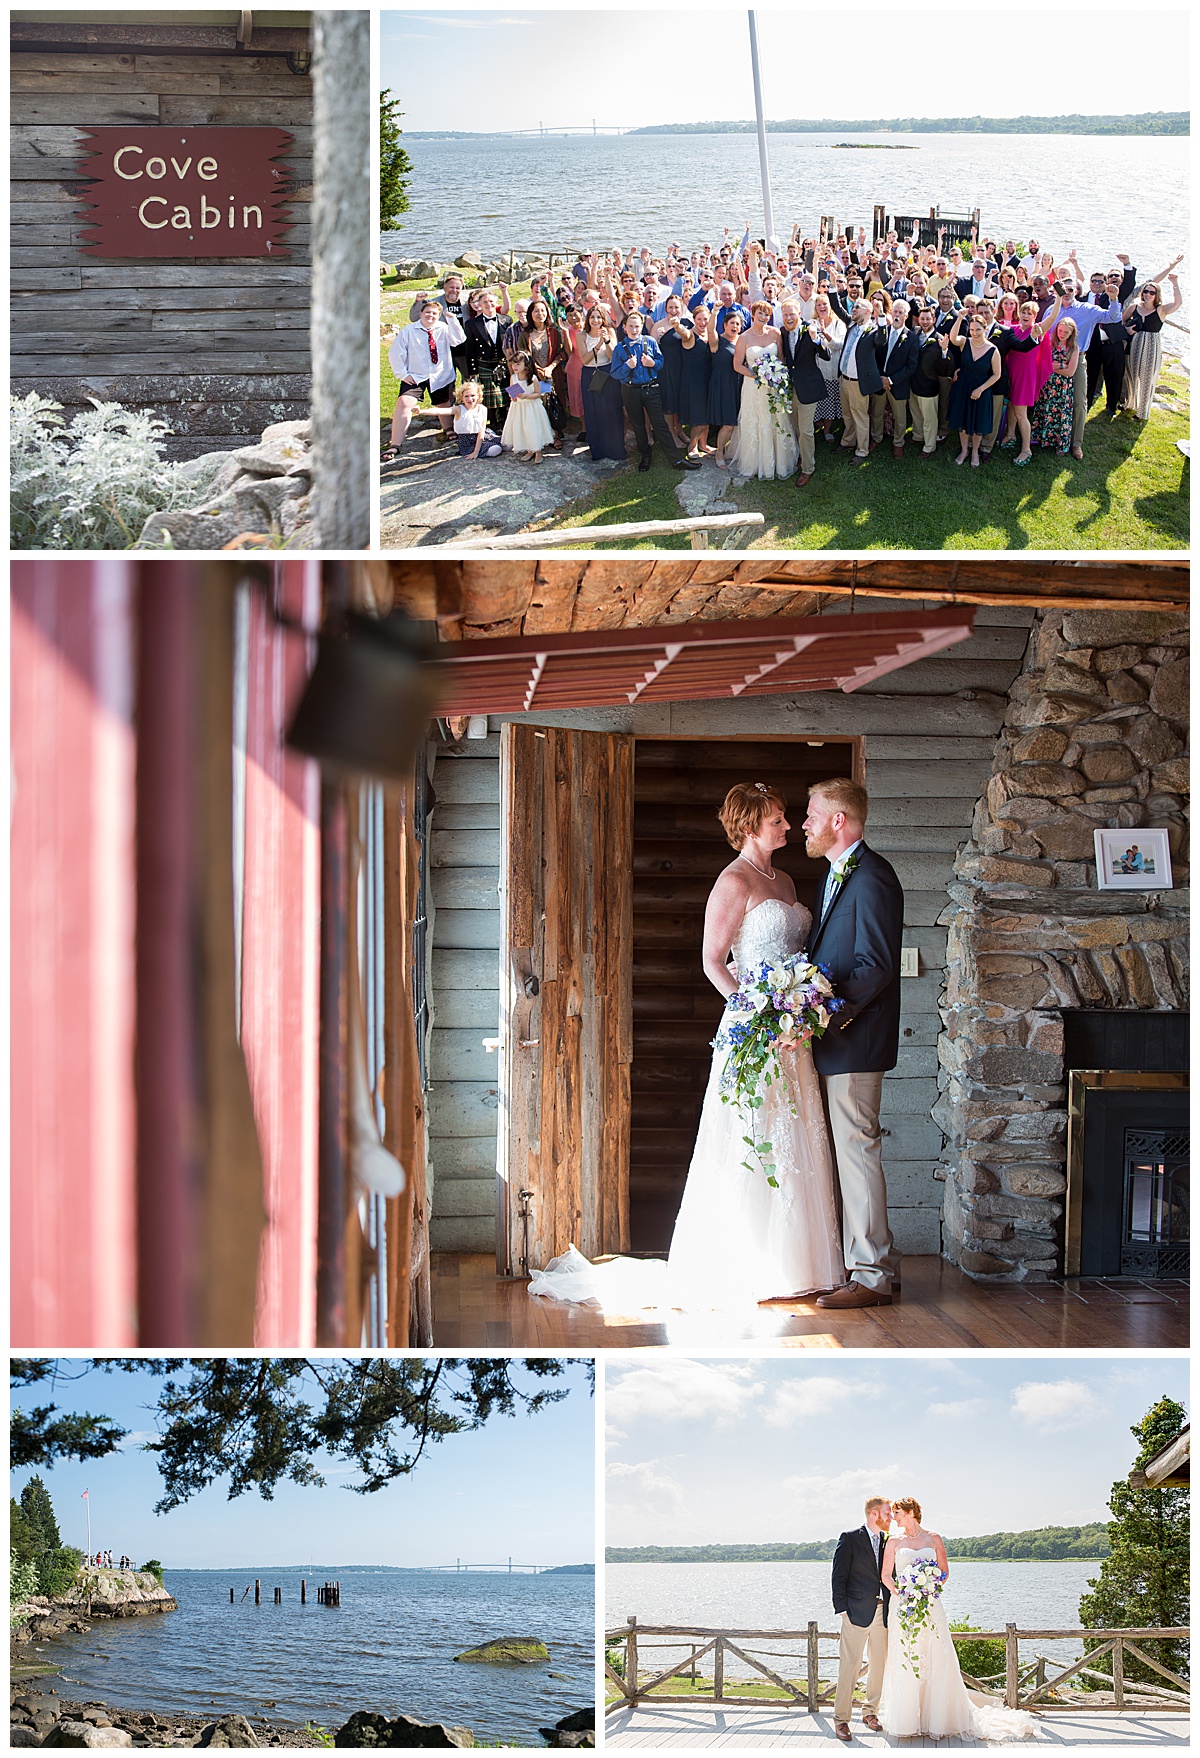 Mount Hope Farm's Cove Cabin is the perfect place to celebrate your wedding. 